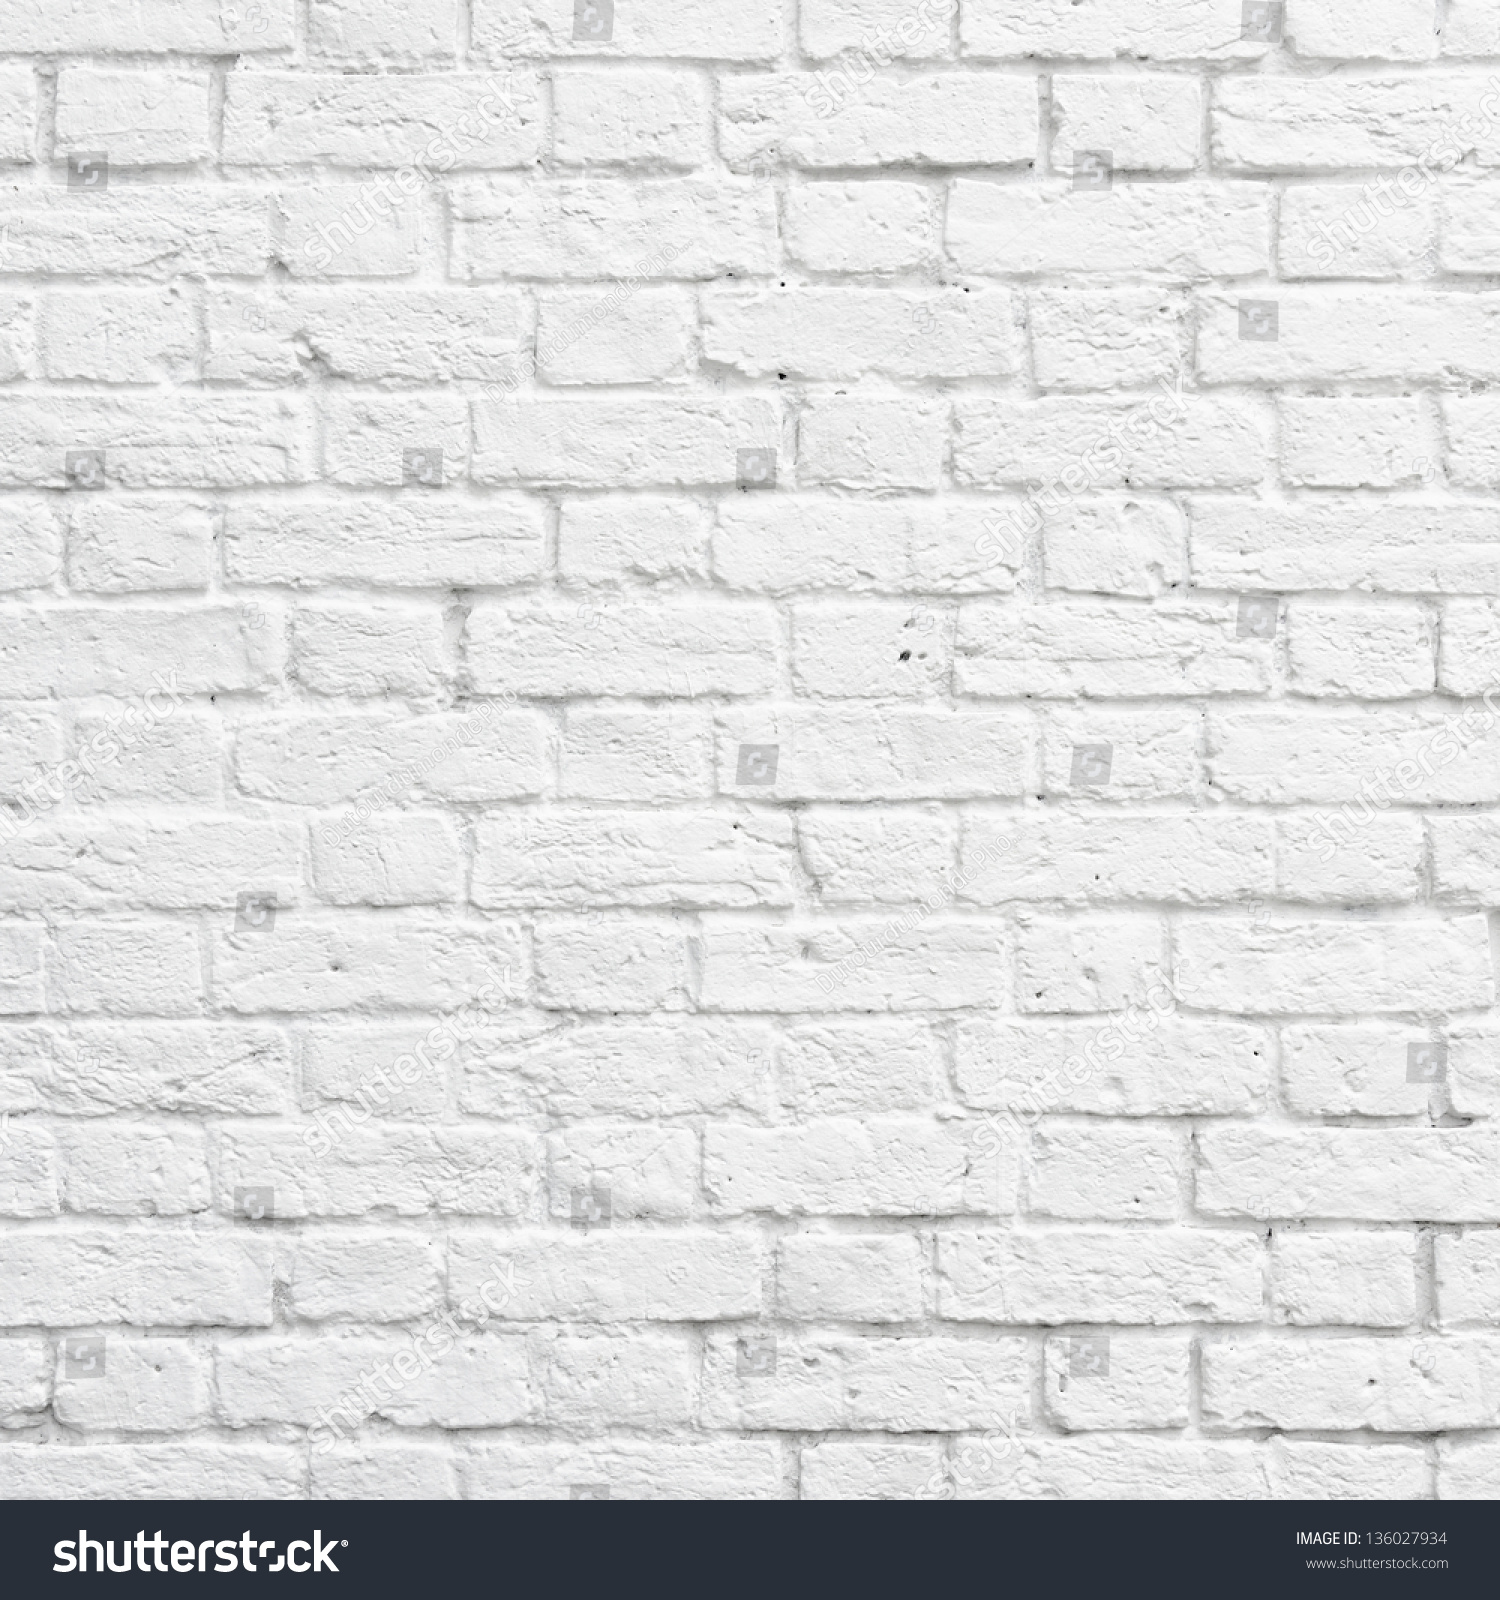 White Brick Wall Texture Or Background Stock Photo 136027934 : Shutterstock